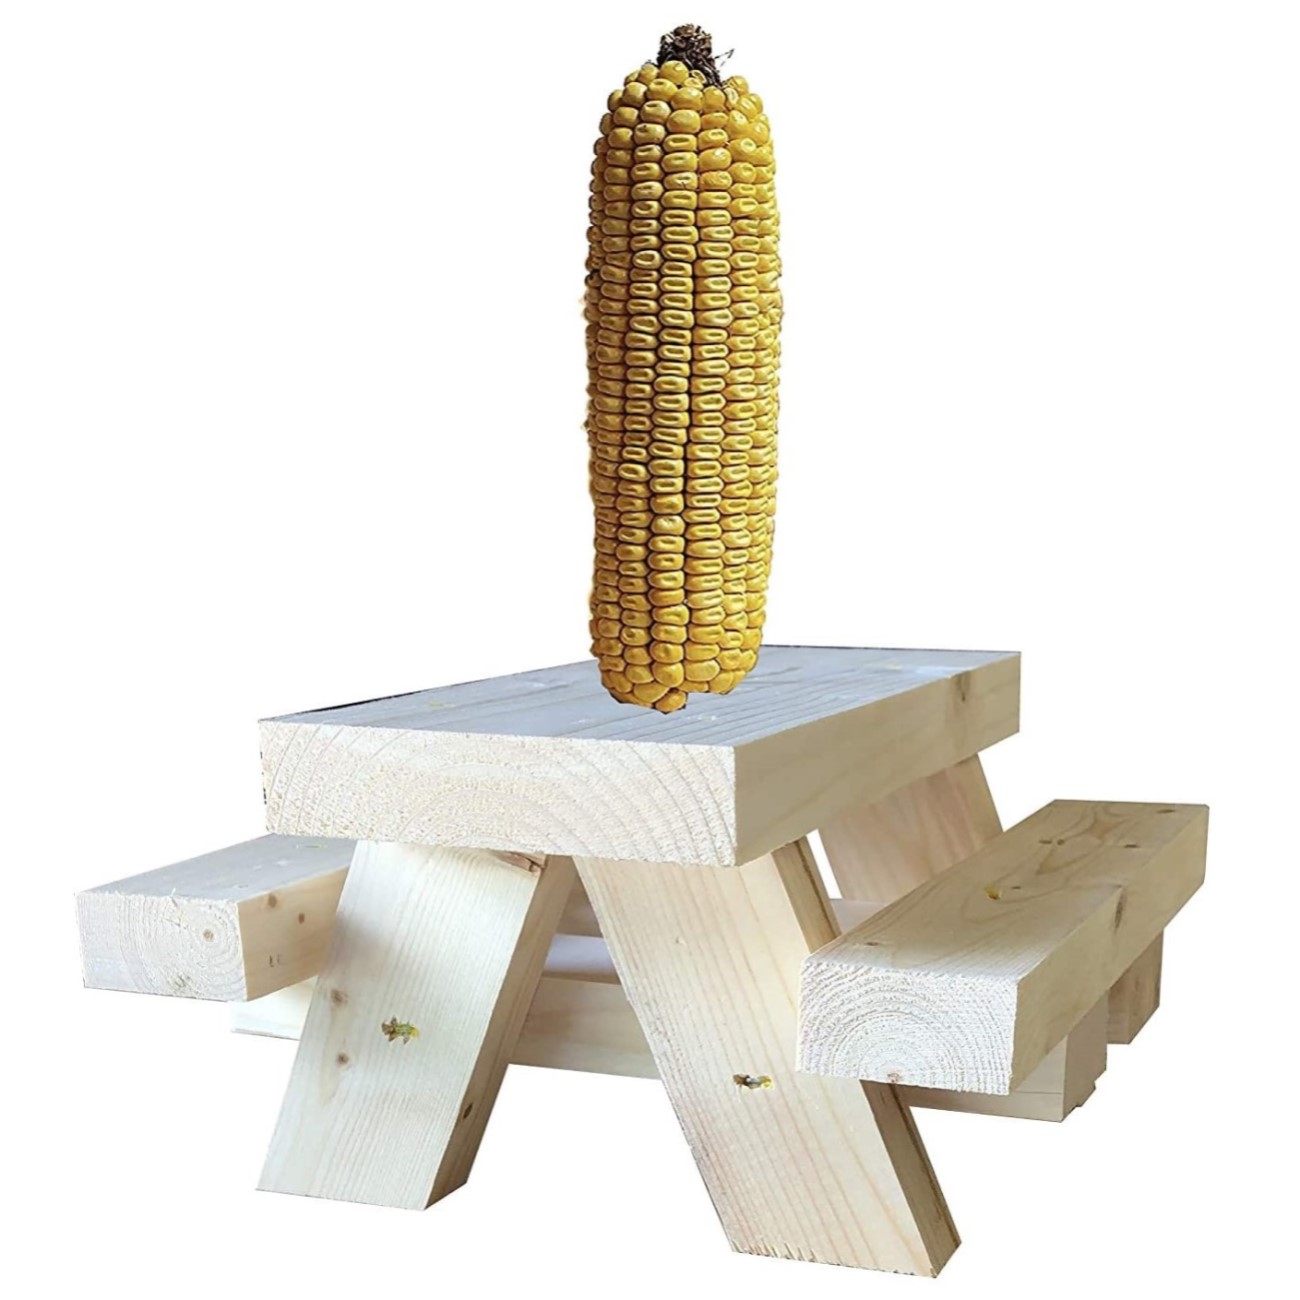 SquirrelSupply.com-Squirrel-Feeder-Picnic-Table-Floor-or-Table-Top-Mount-Large-Size-Hand-Made-in-USA-No-Tools-Required-Corn-Cob-Feeder-for-Squirrel-2